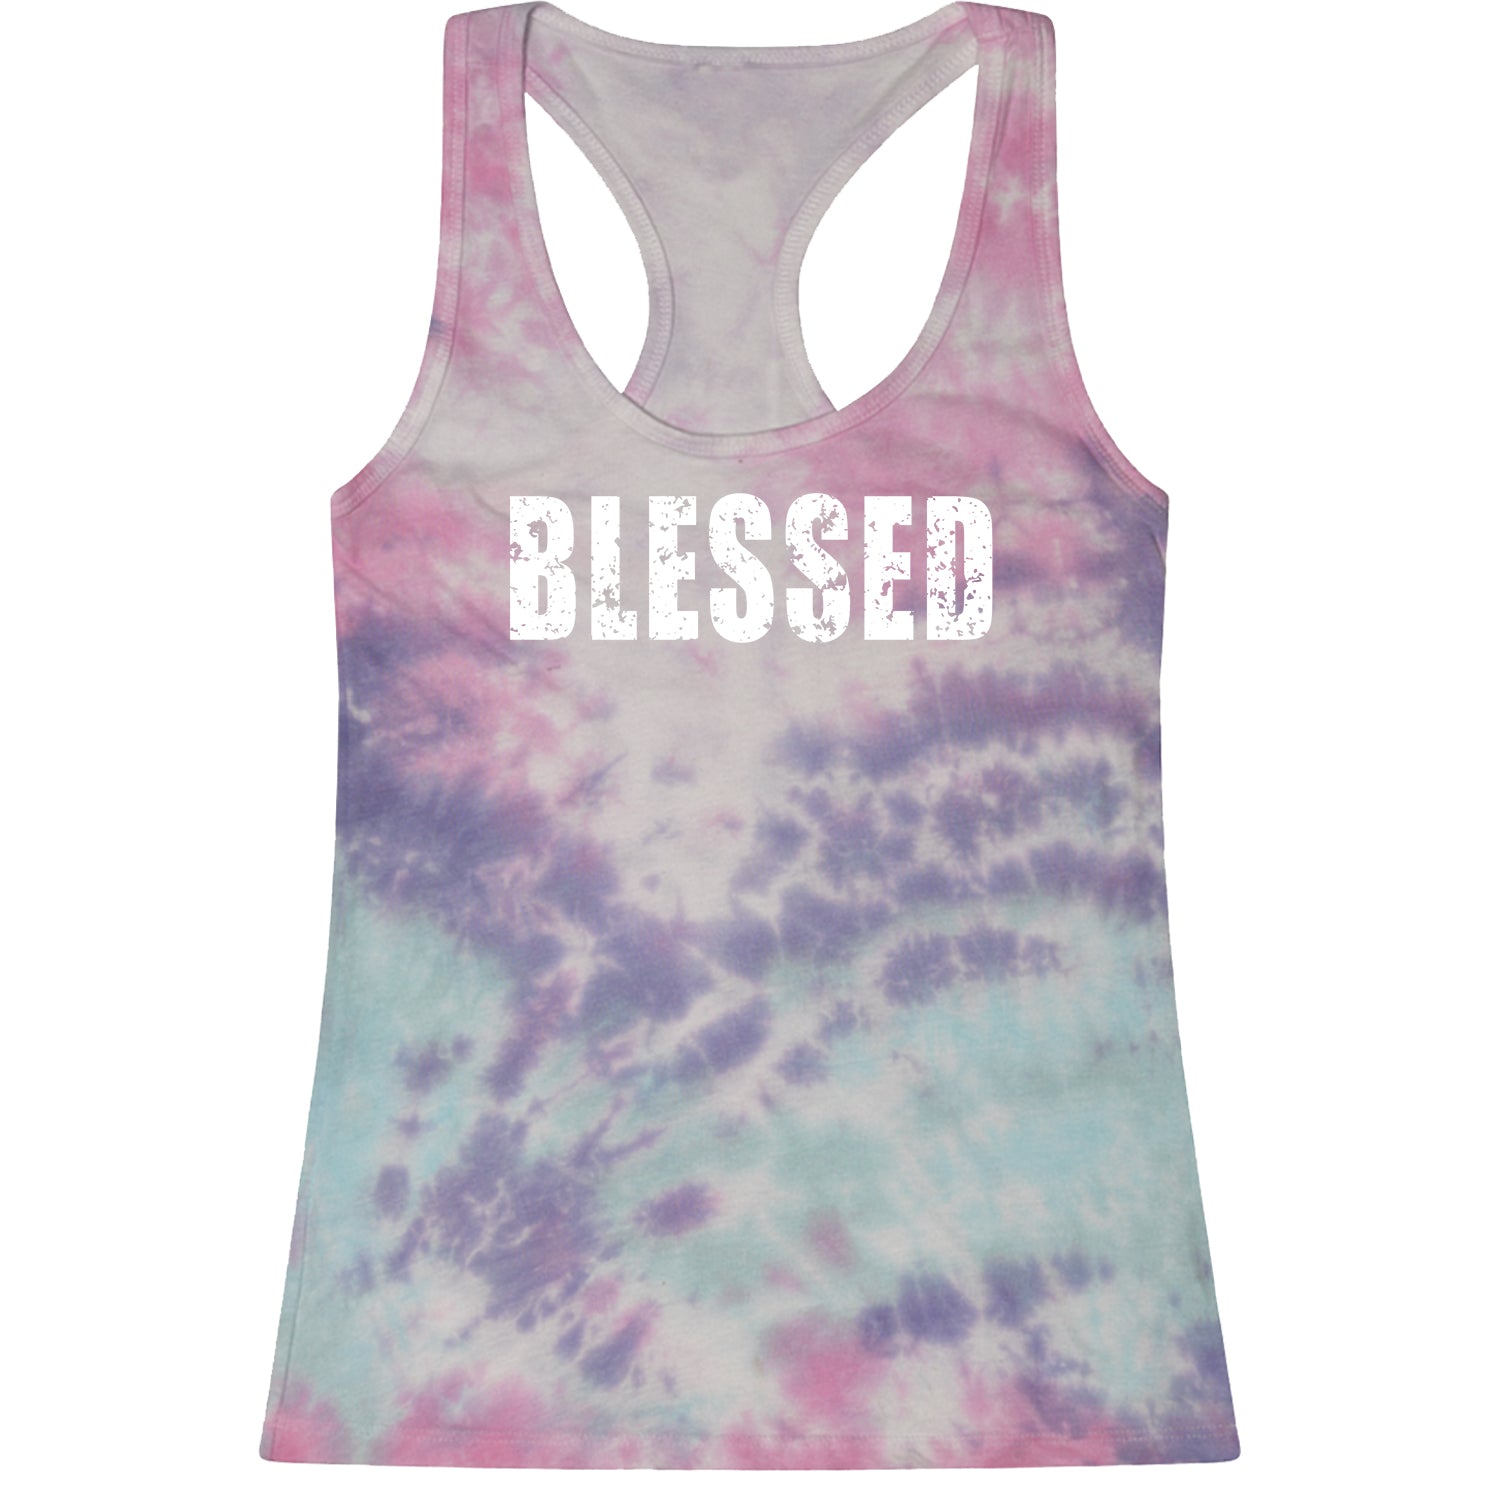 Blessed Religious Grateful Thankful Racerback Tank Top for Women #expressiontees by Expression Tees